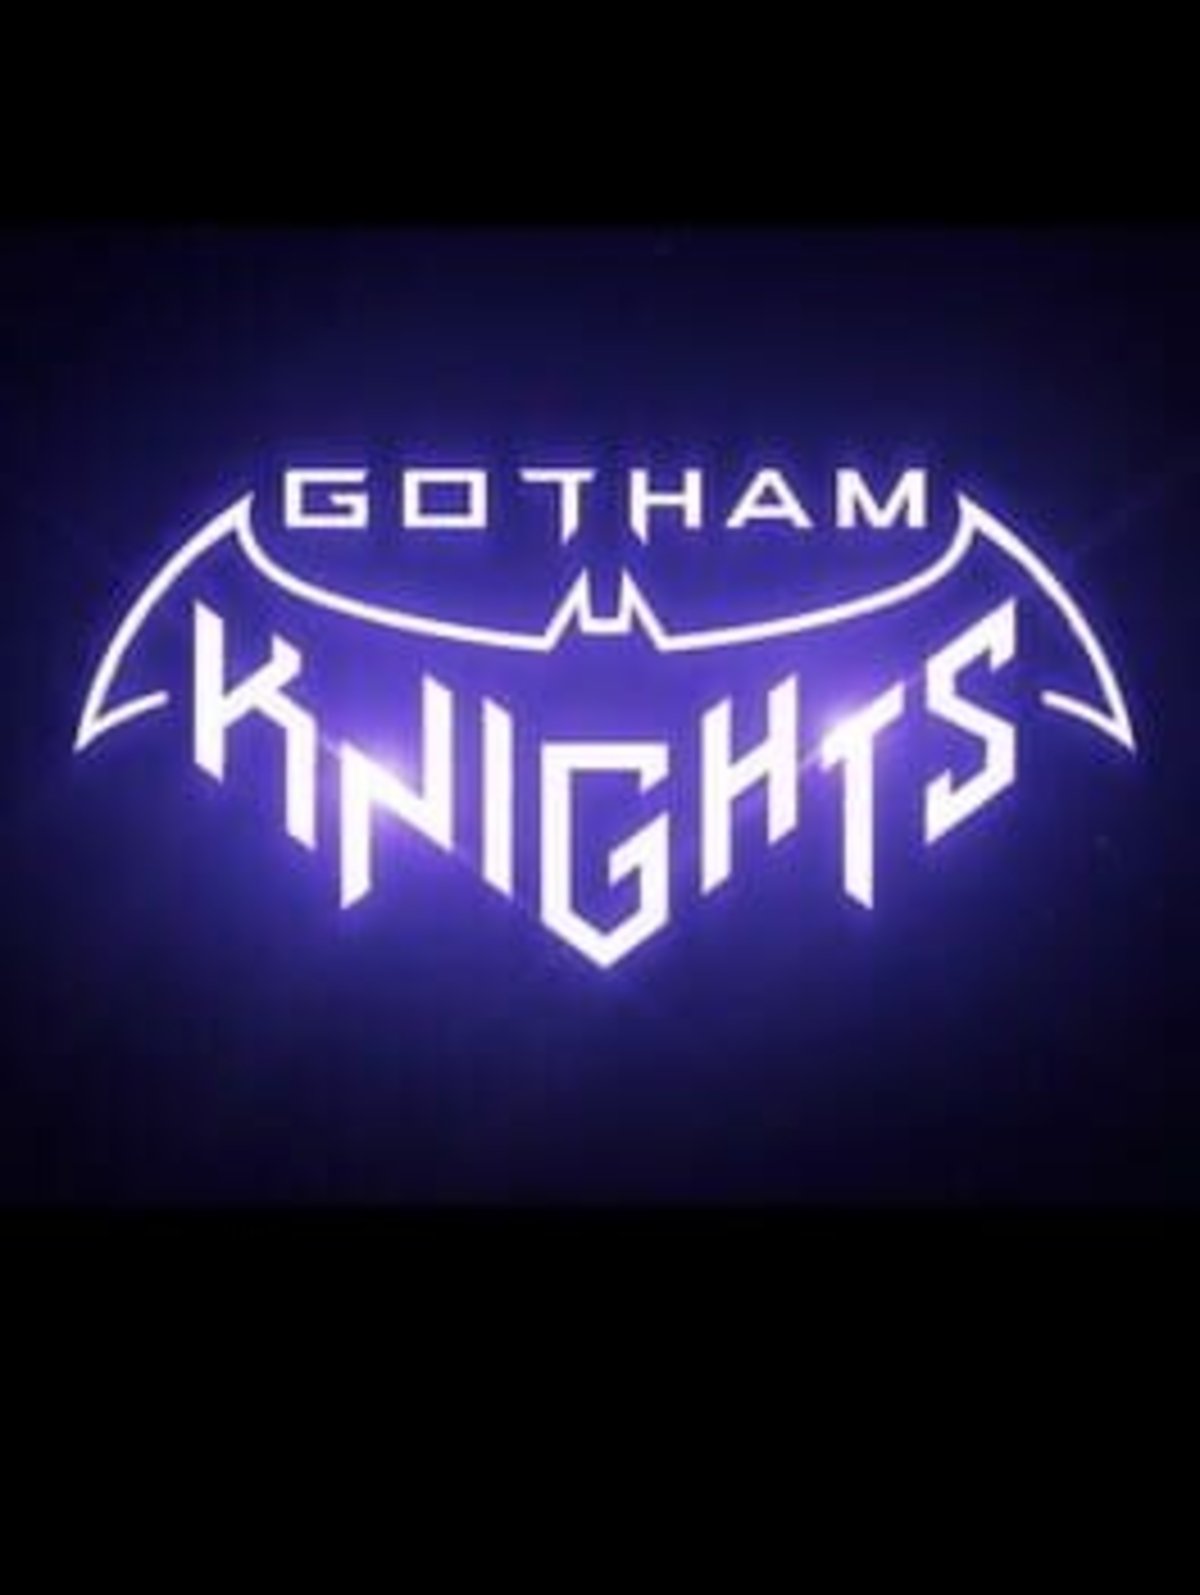 Gotham Knights reappears on the DC FanDome with a new trailer